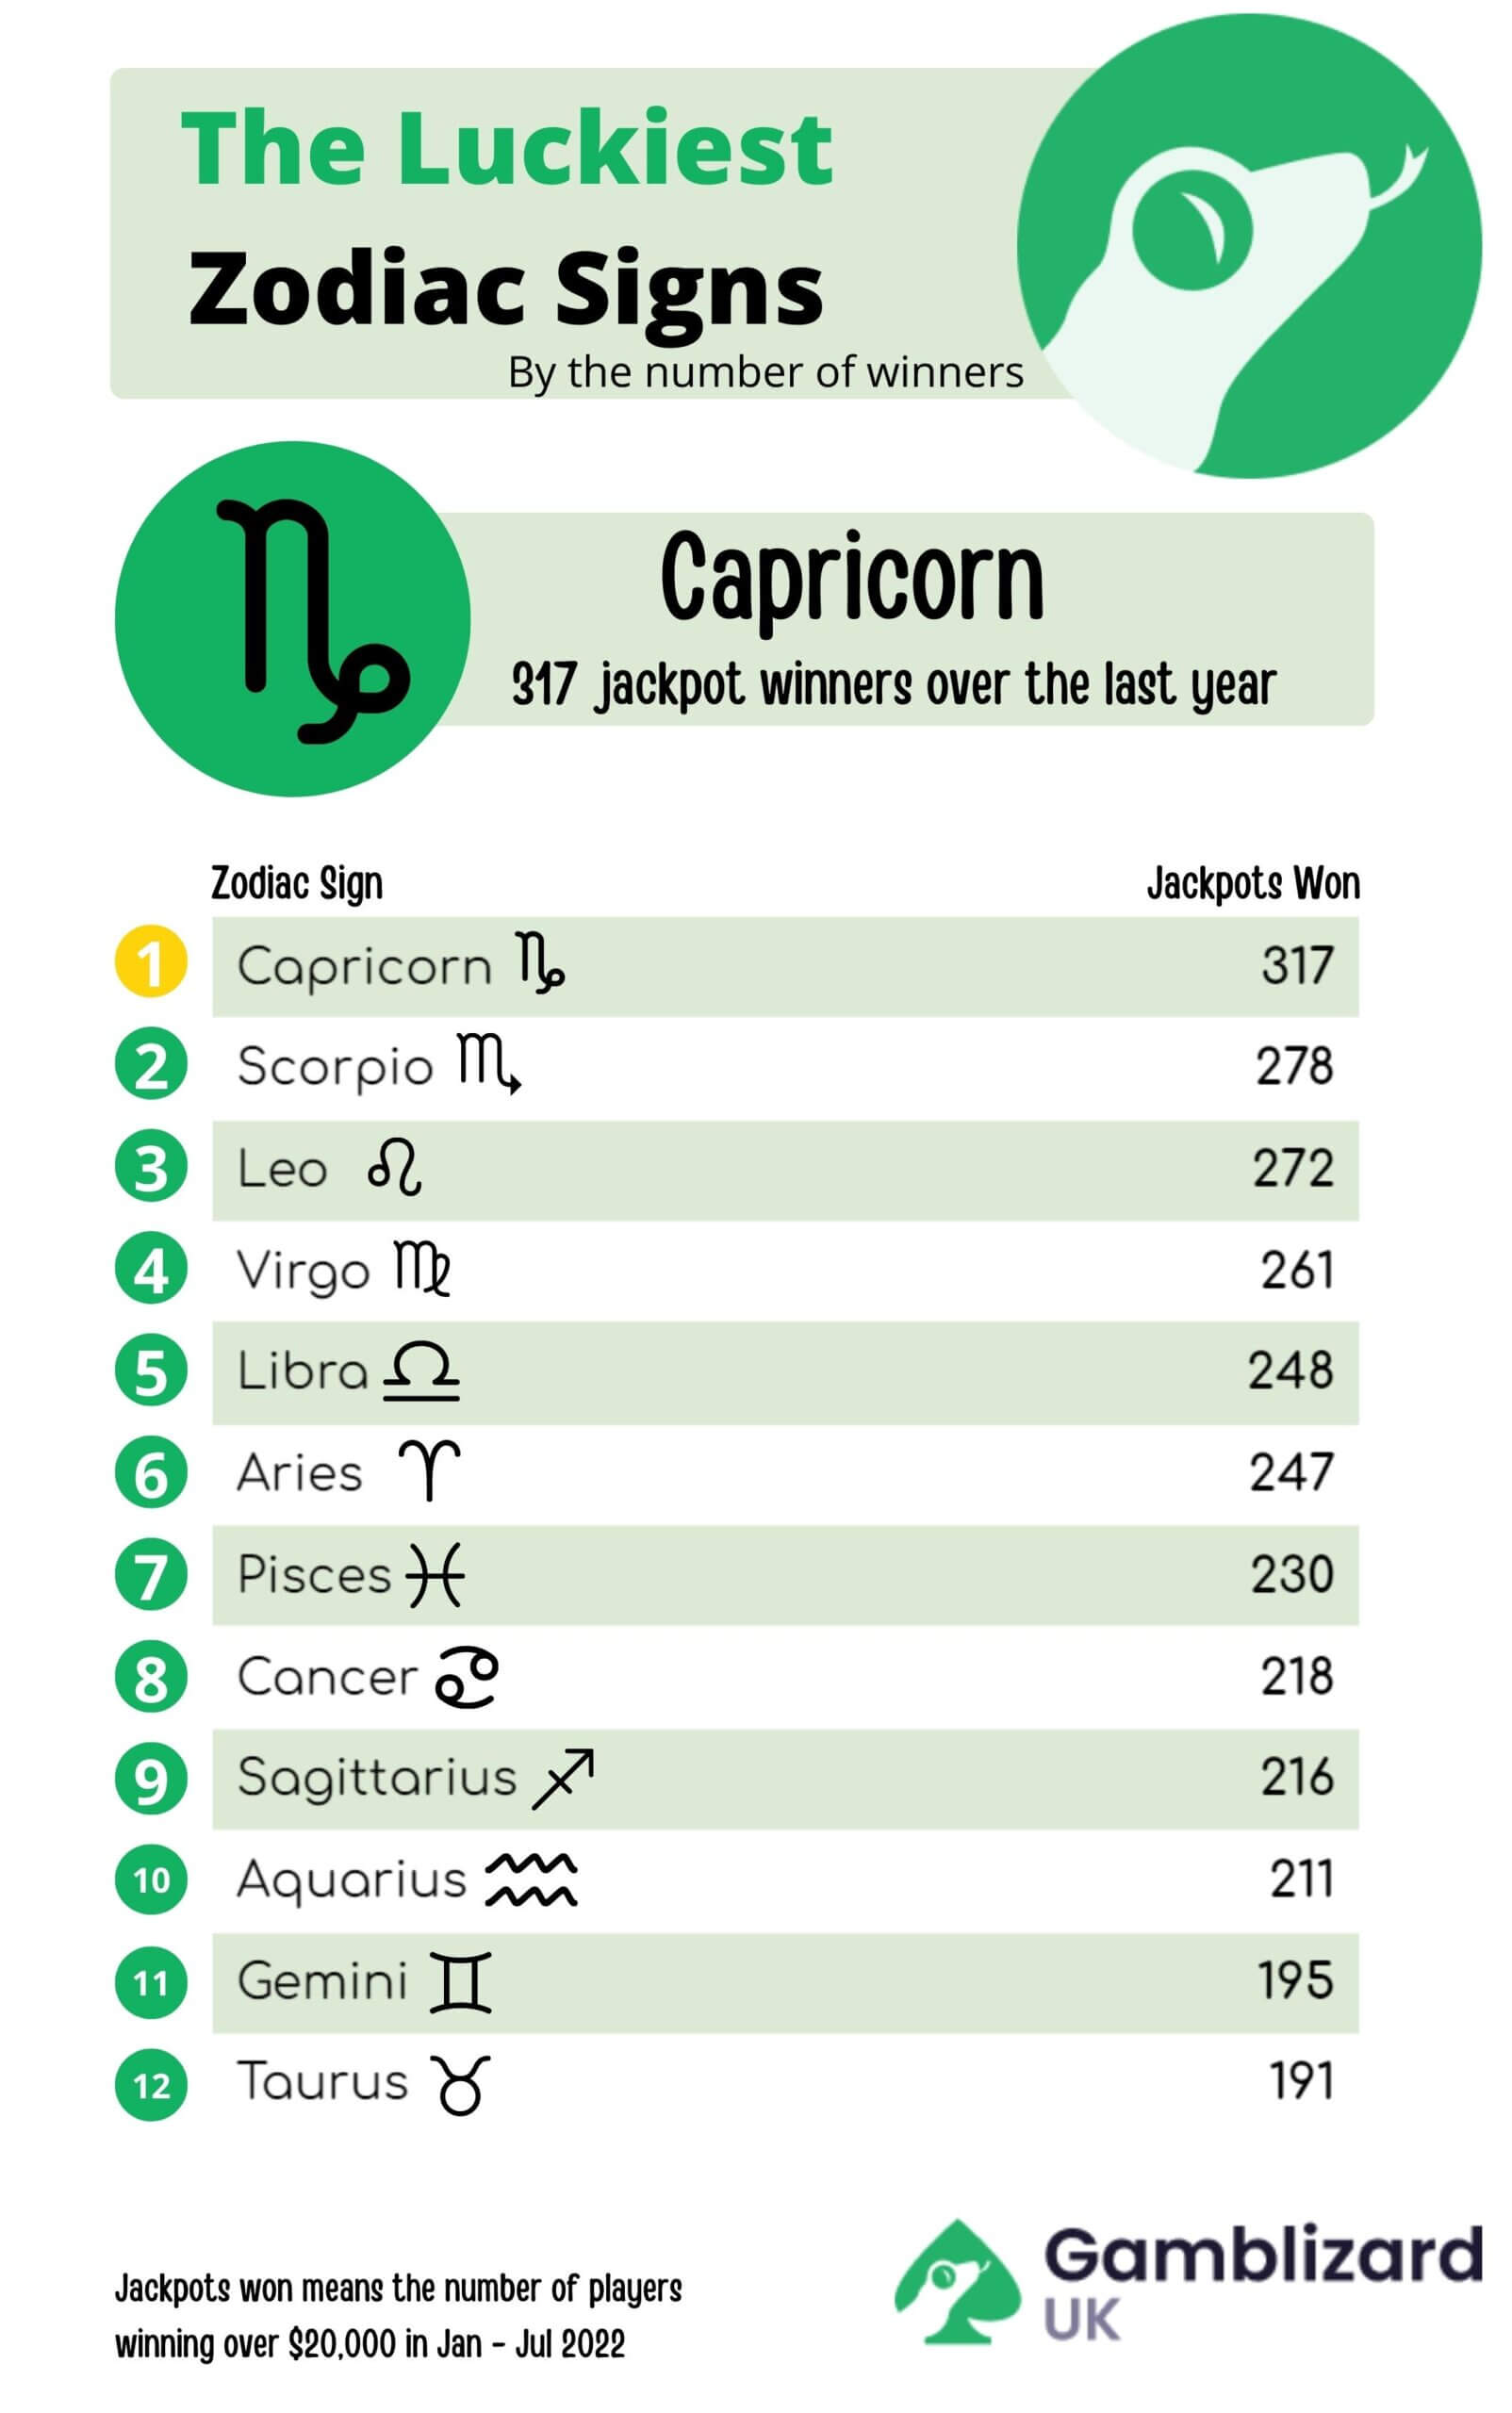 The Luckiest Zodiac Sign by the Number of Winners